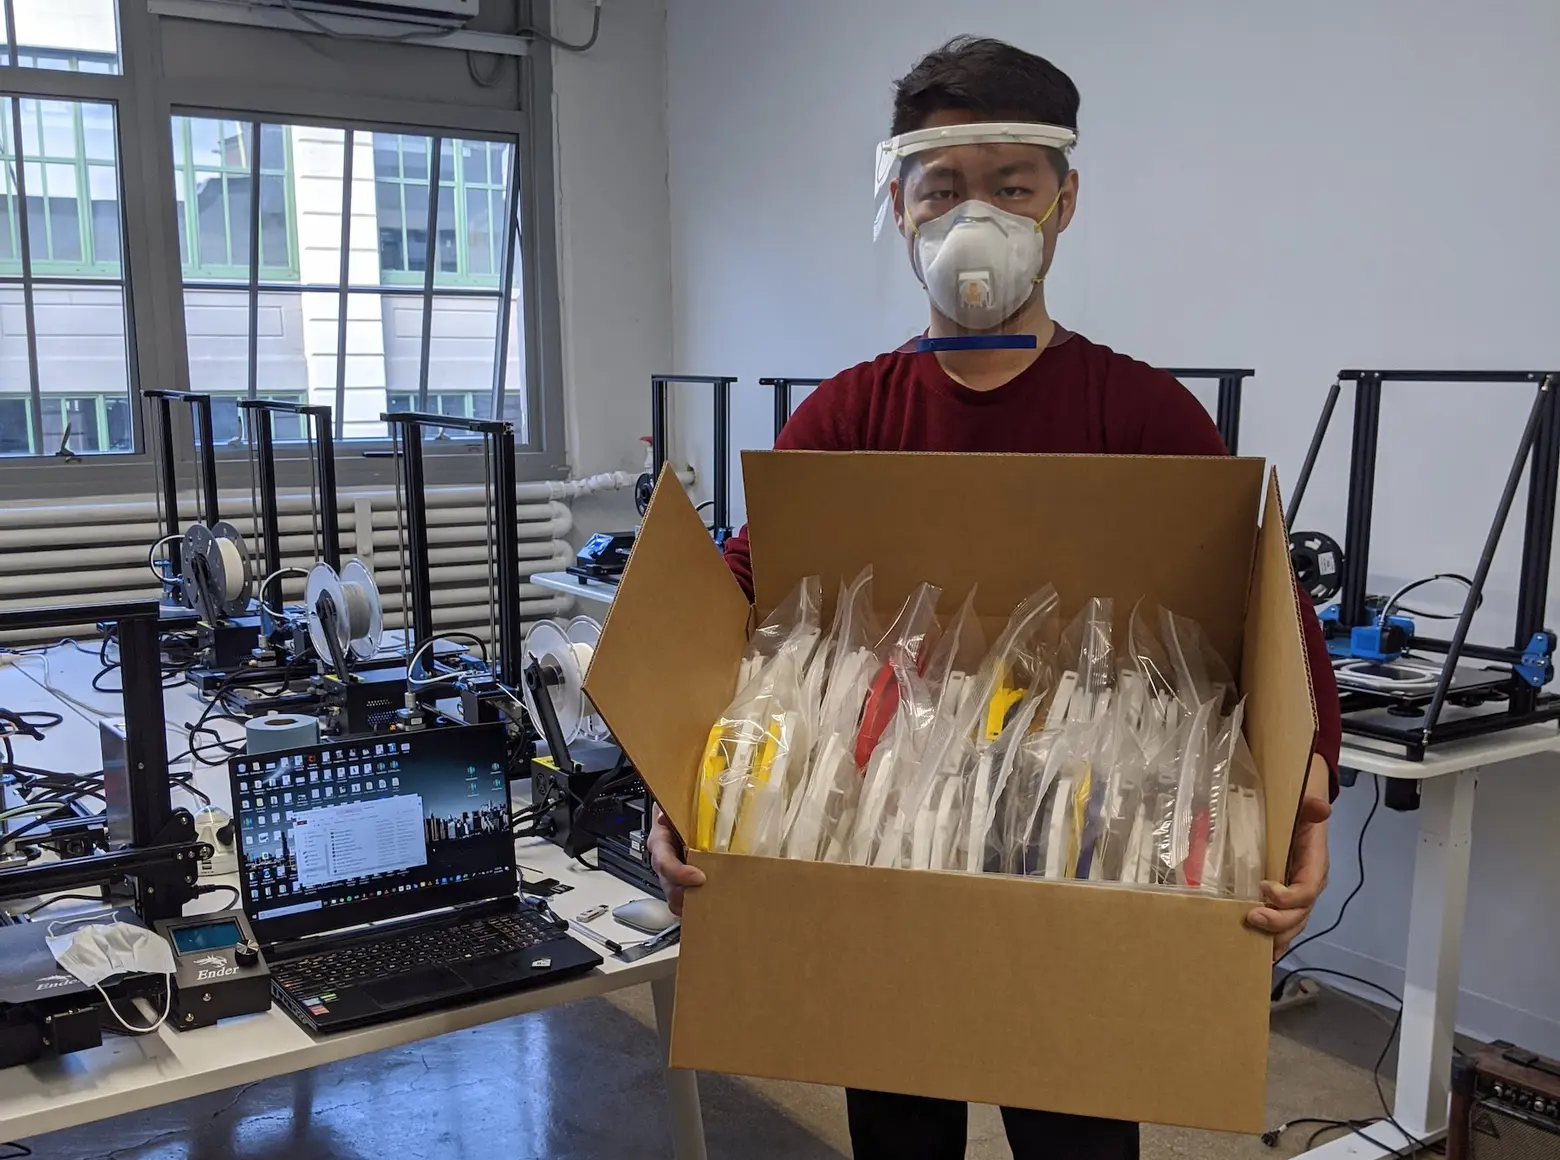 Meet iMakr, the Brooklyn 3D-printer that’s made 5,000 face shields for NYC’s healthcare workers